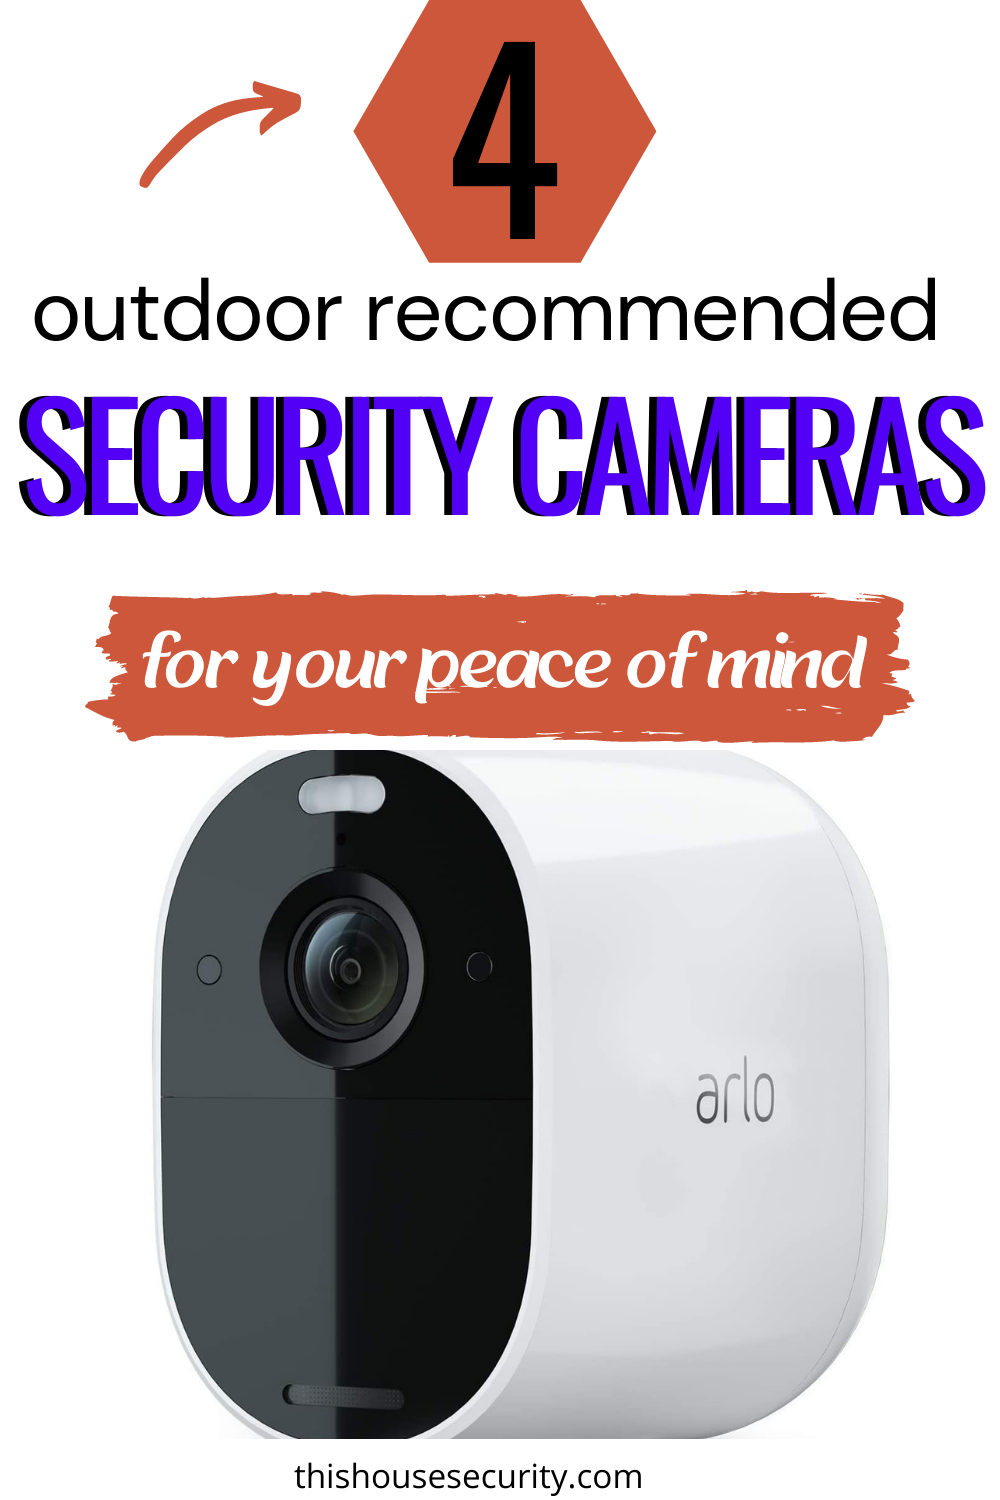 Arlo Video Doorbell comes to mind when you are asking what`s the best security camera for utdoors